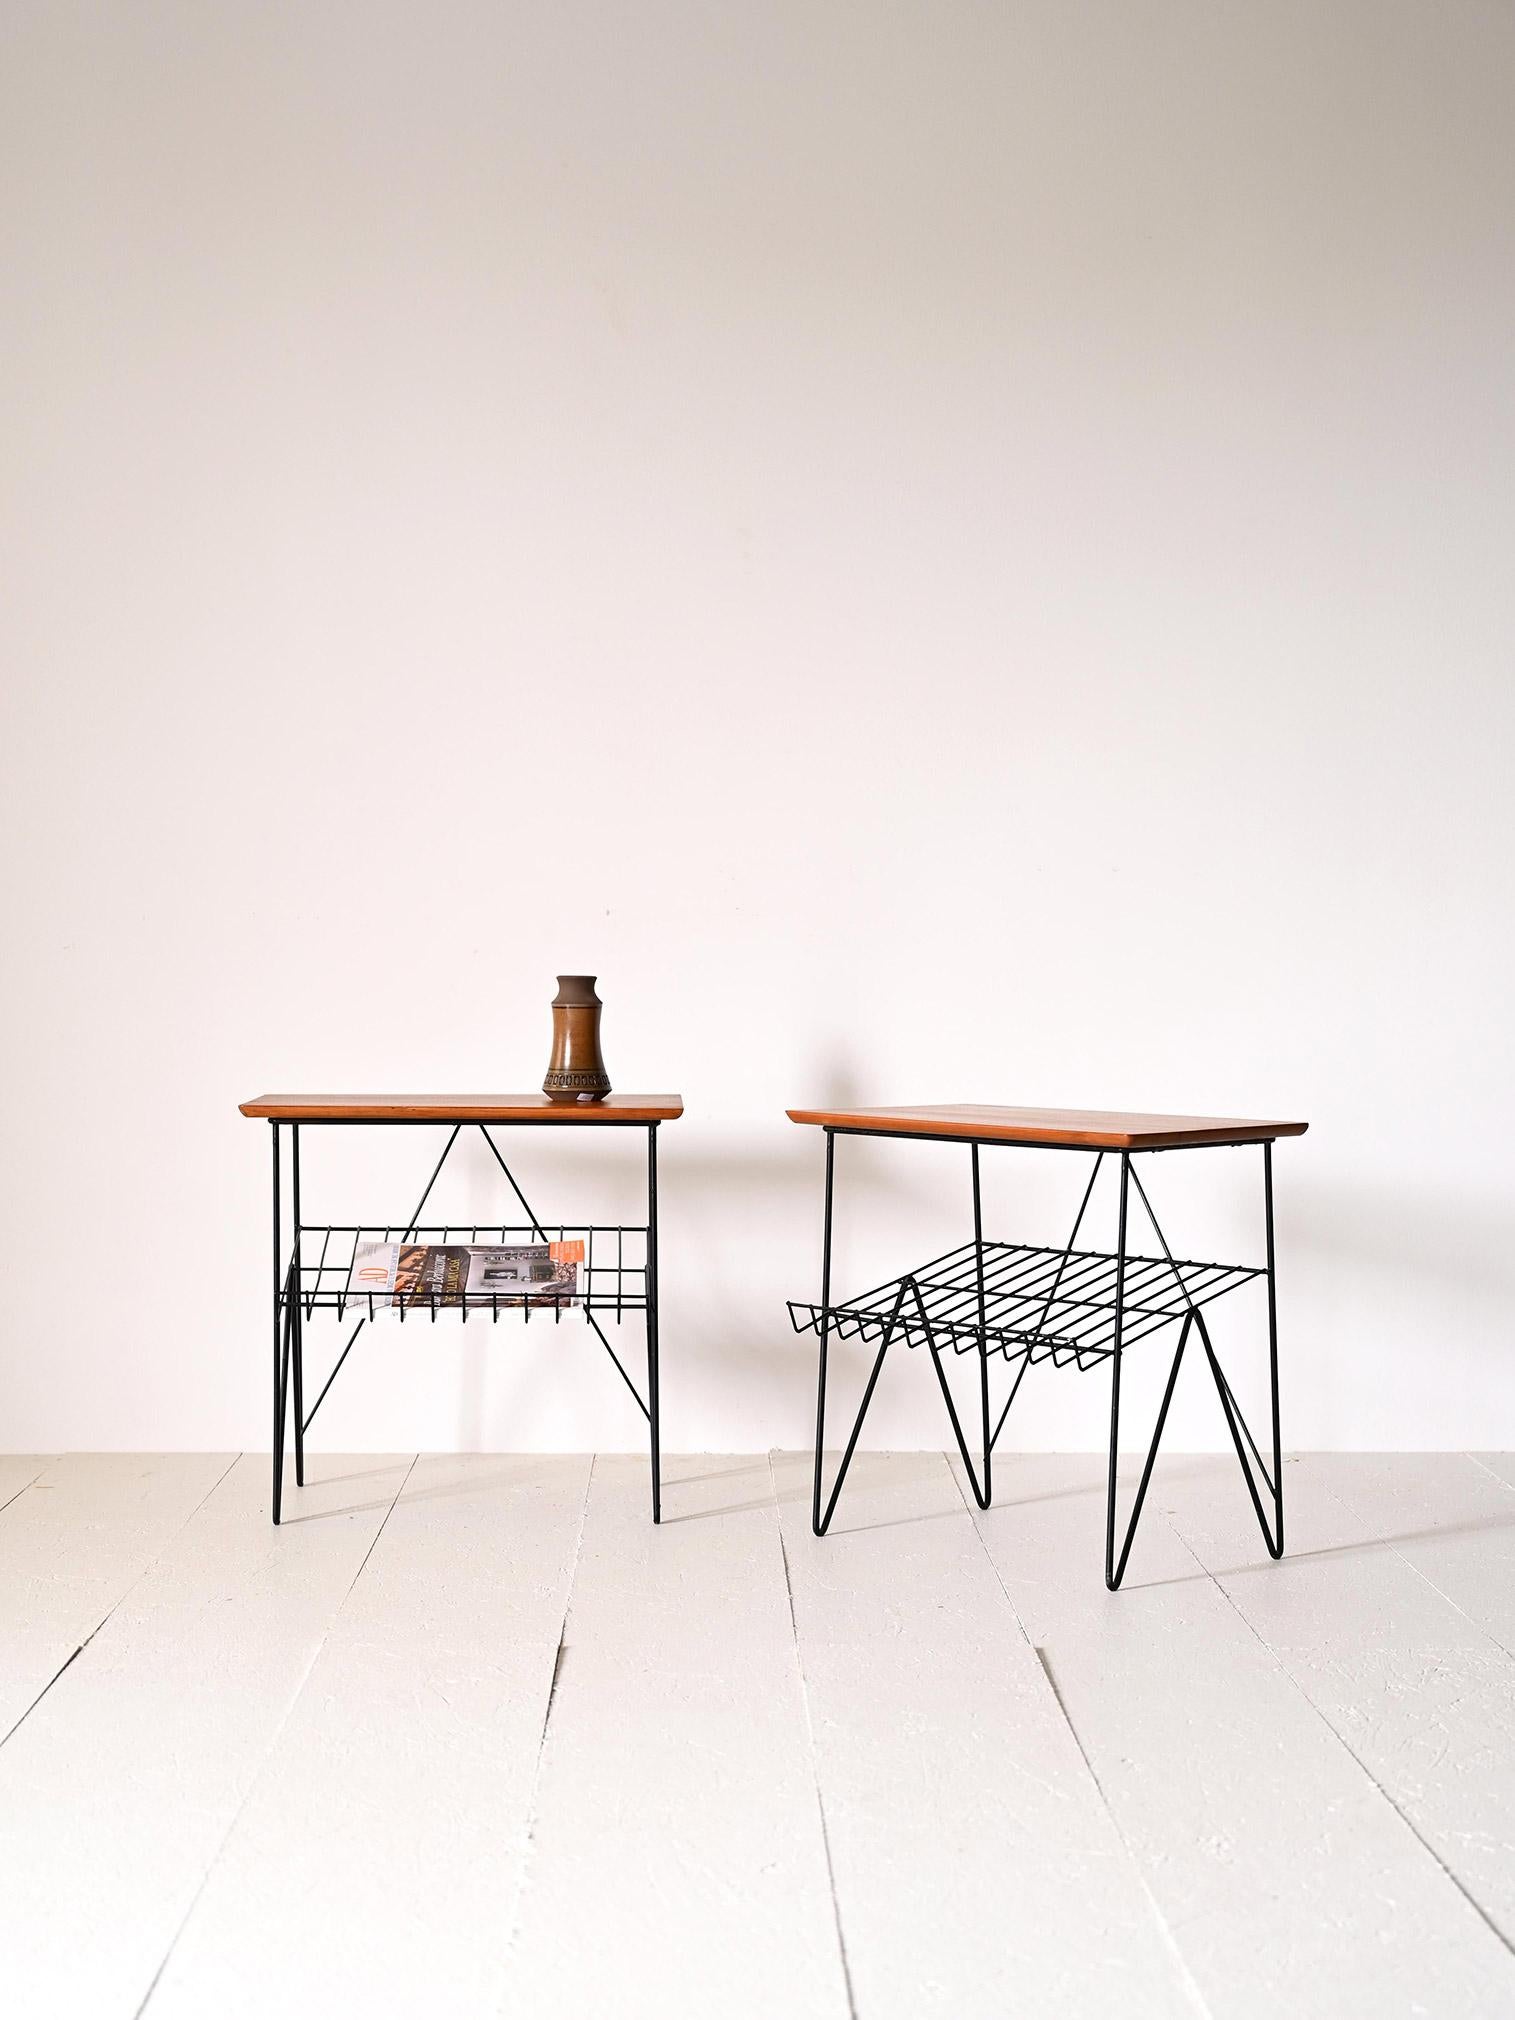 Vintage 1960s nightstands of Swedish provenance.

These Scandinavian furniture pieces are distinguished by simple shapes and the use of metal juxtaposed with wood, a typical element of mid-century design.
They feature a teak table top and a black